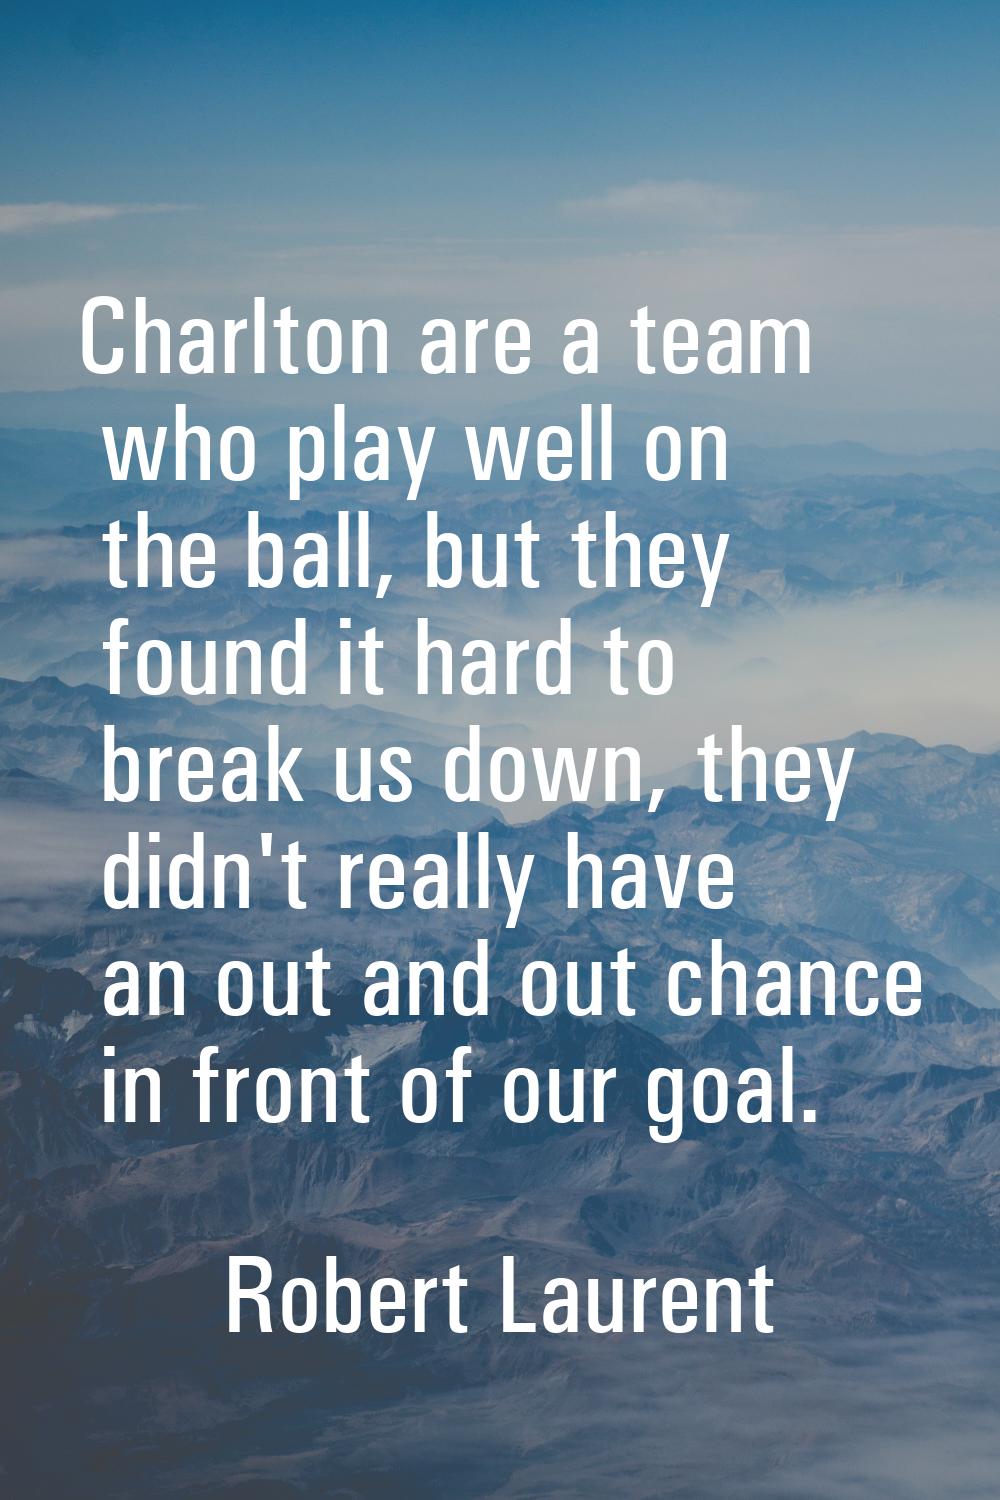 Charlton are a team who play well on the ball, but they found it hard to break us down, they didn't